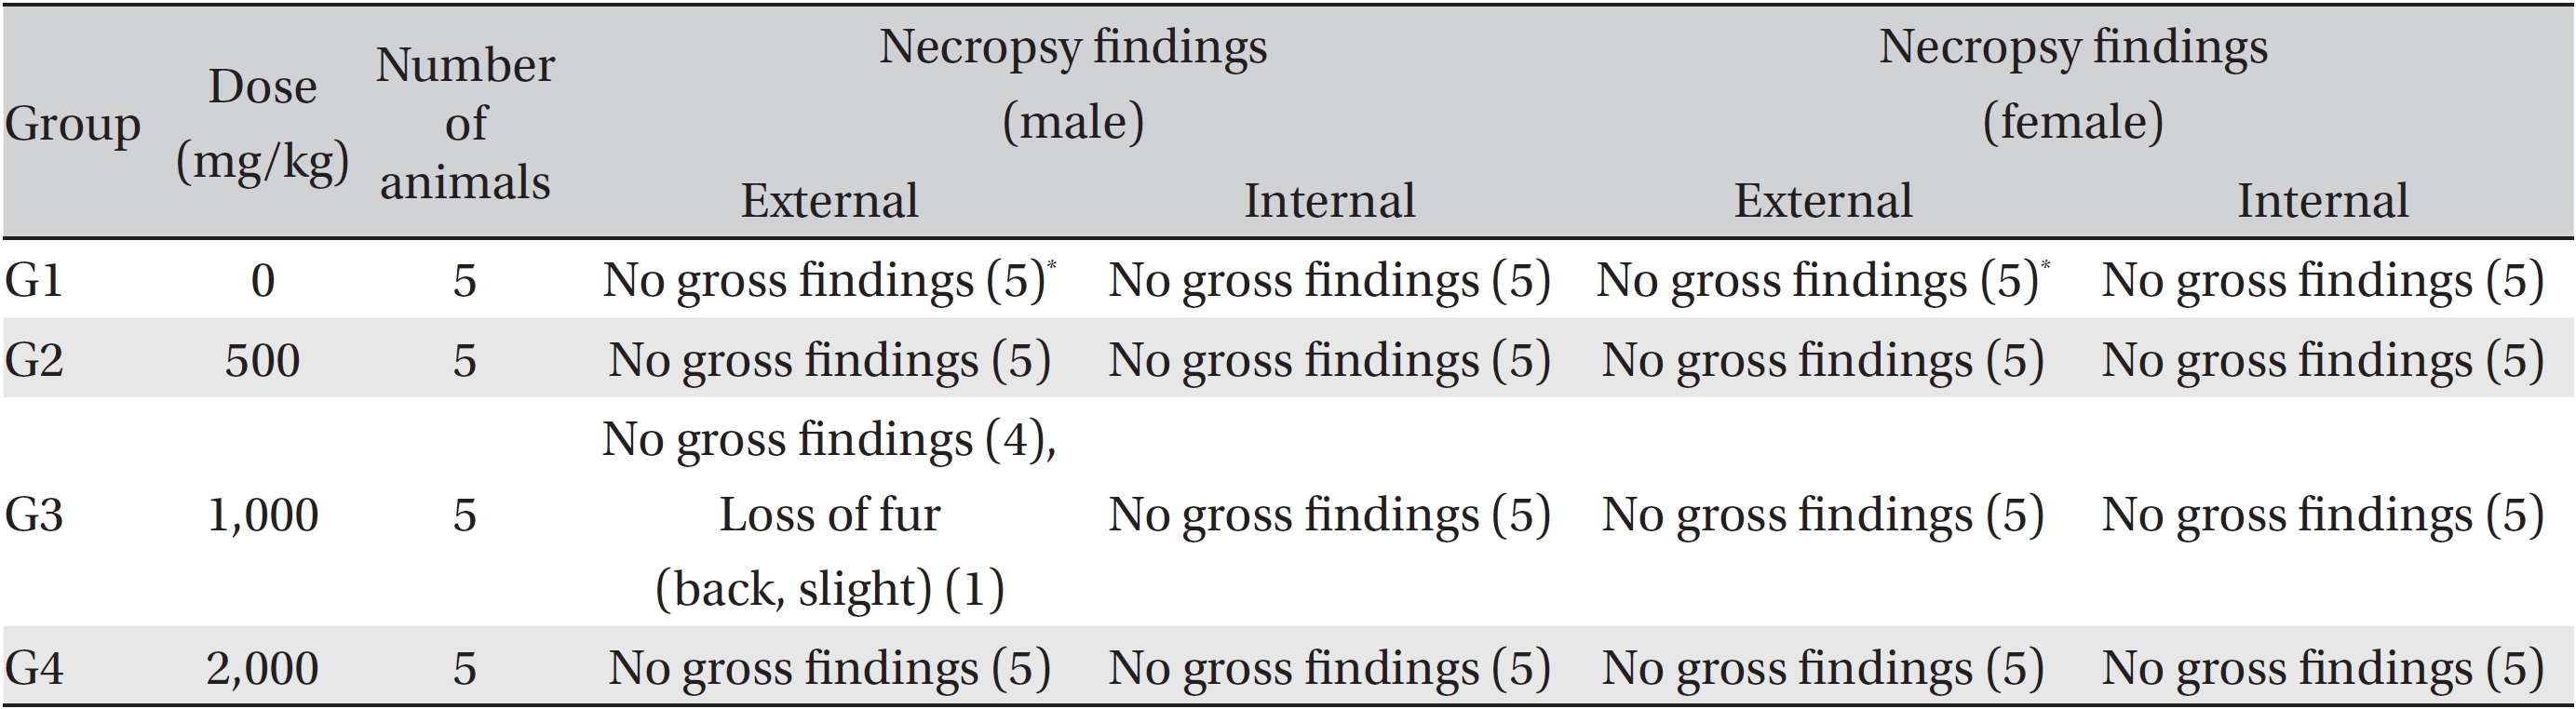 Necropsy findings of male and female rats